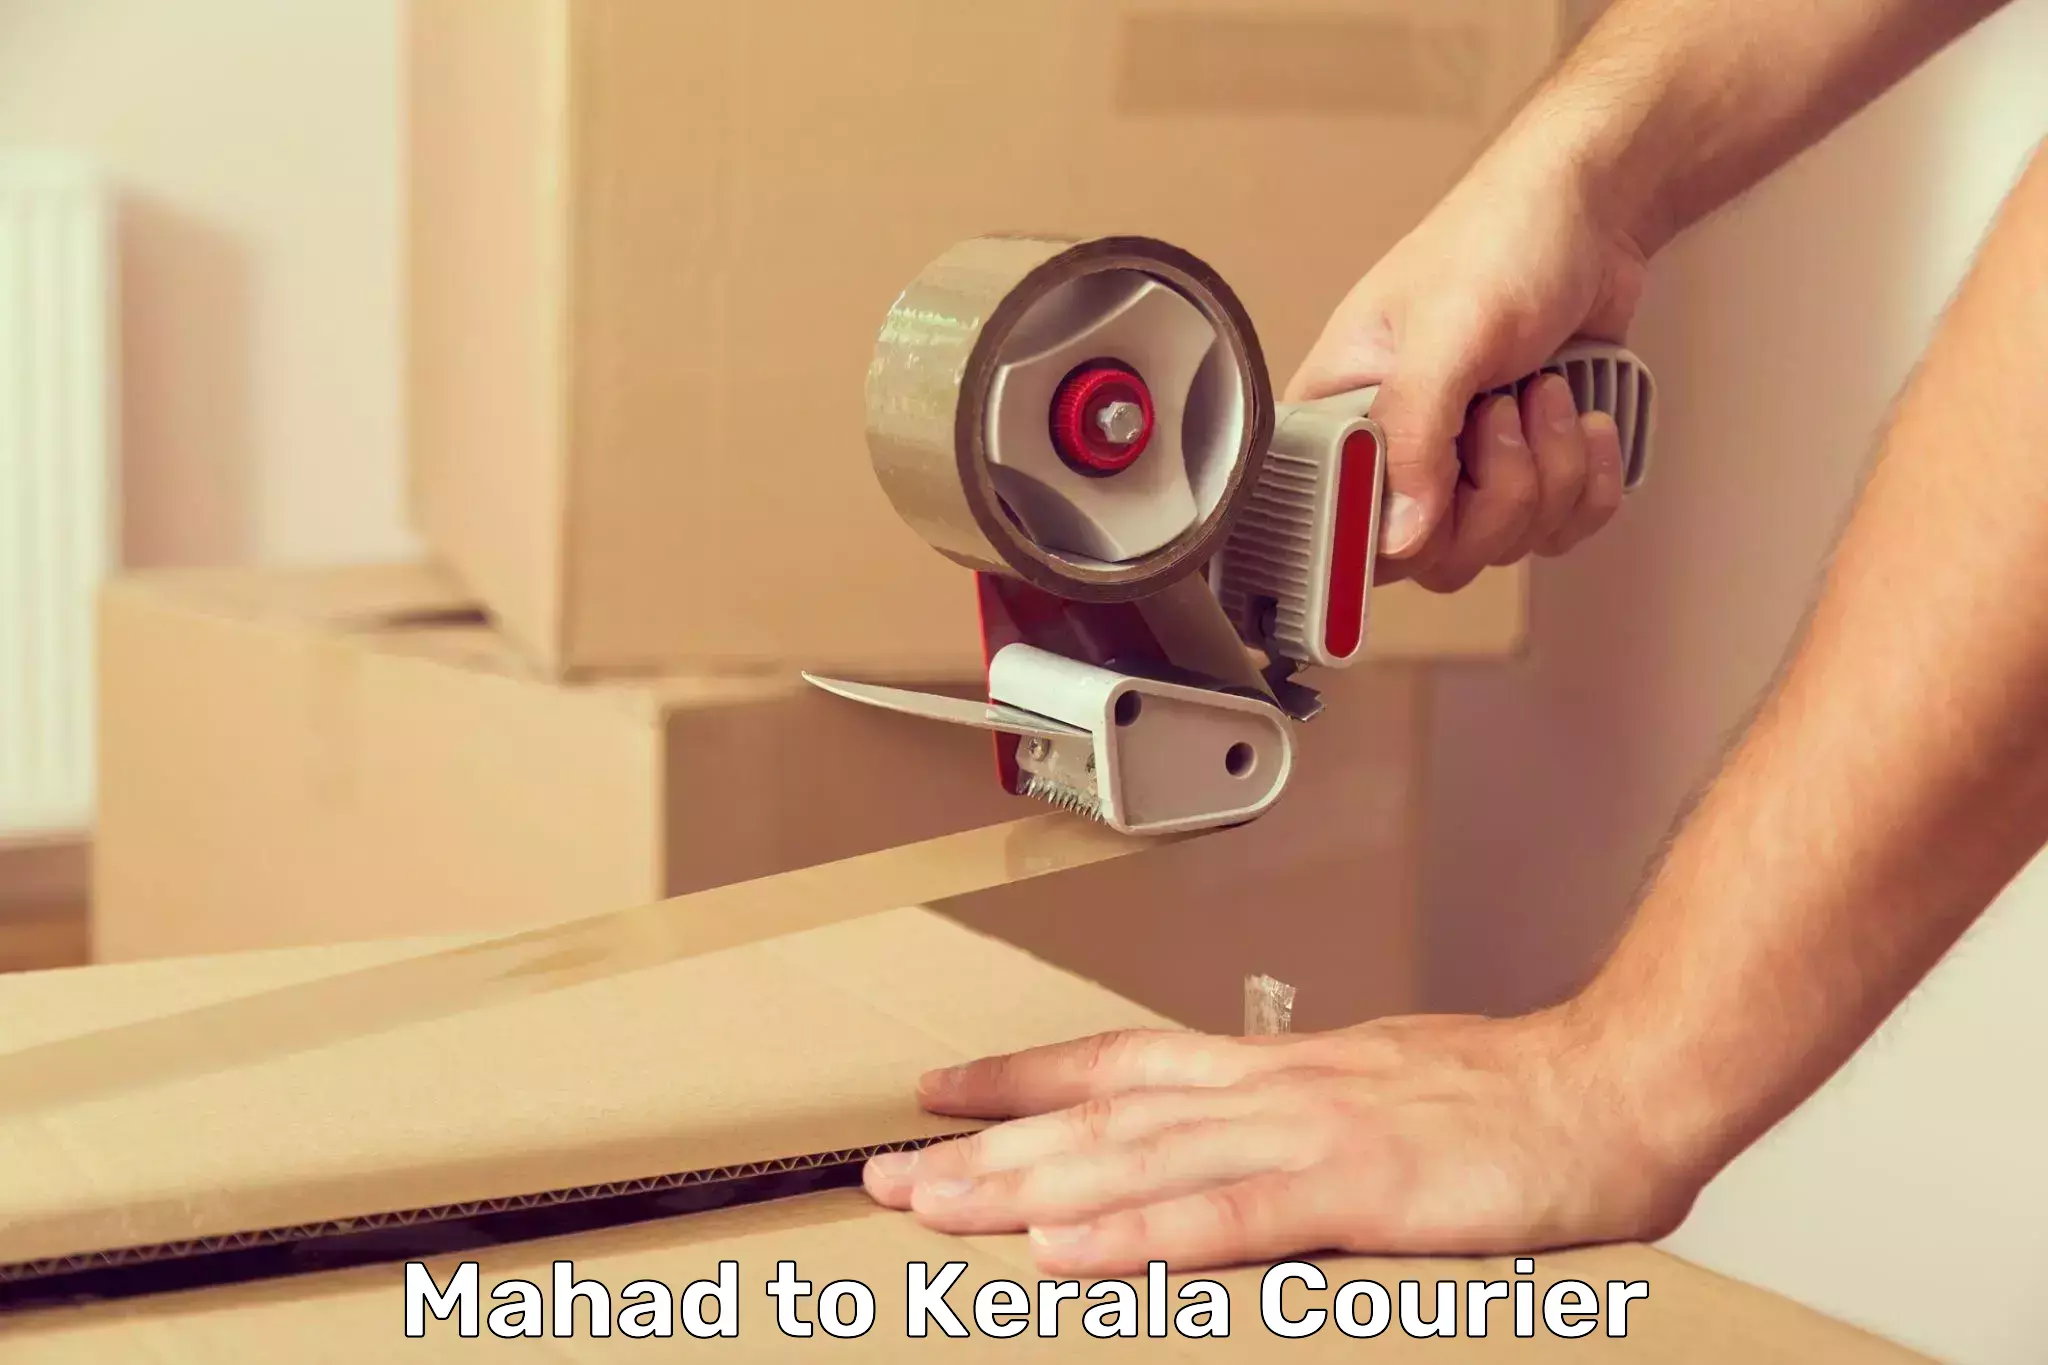 Courier service booking Mahad to Kerala